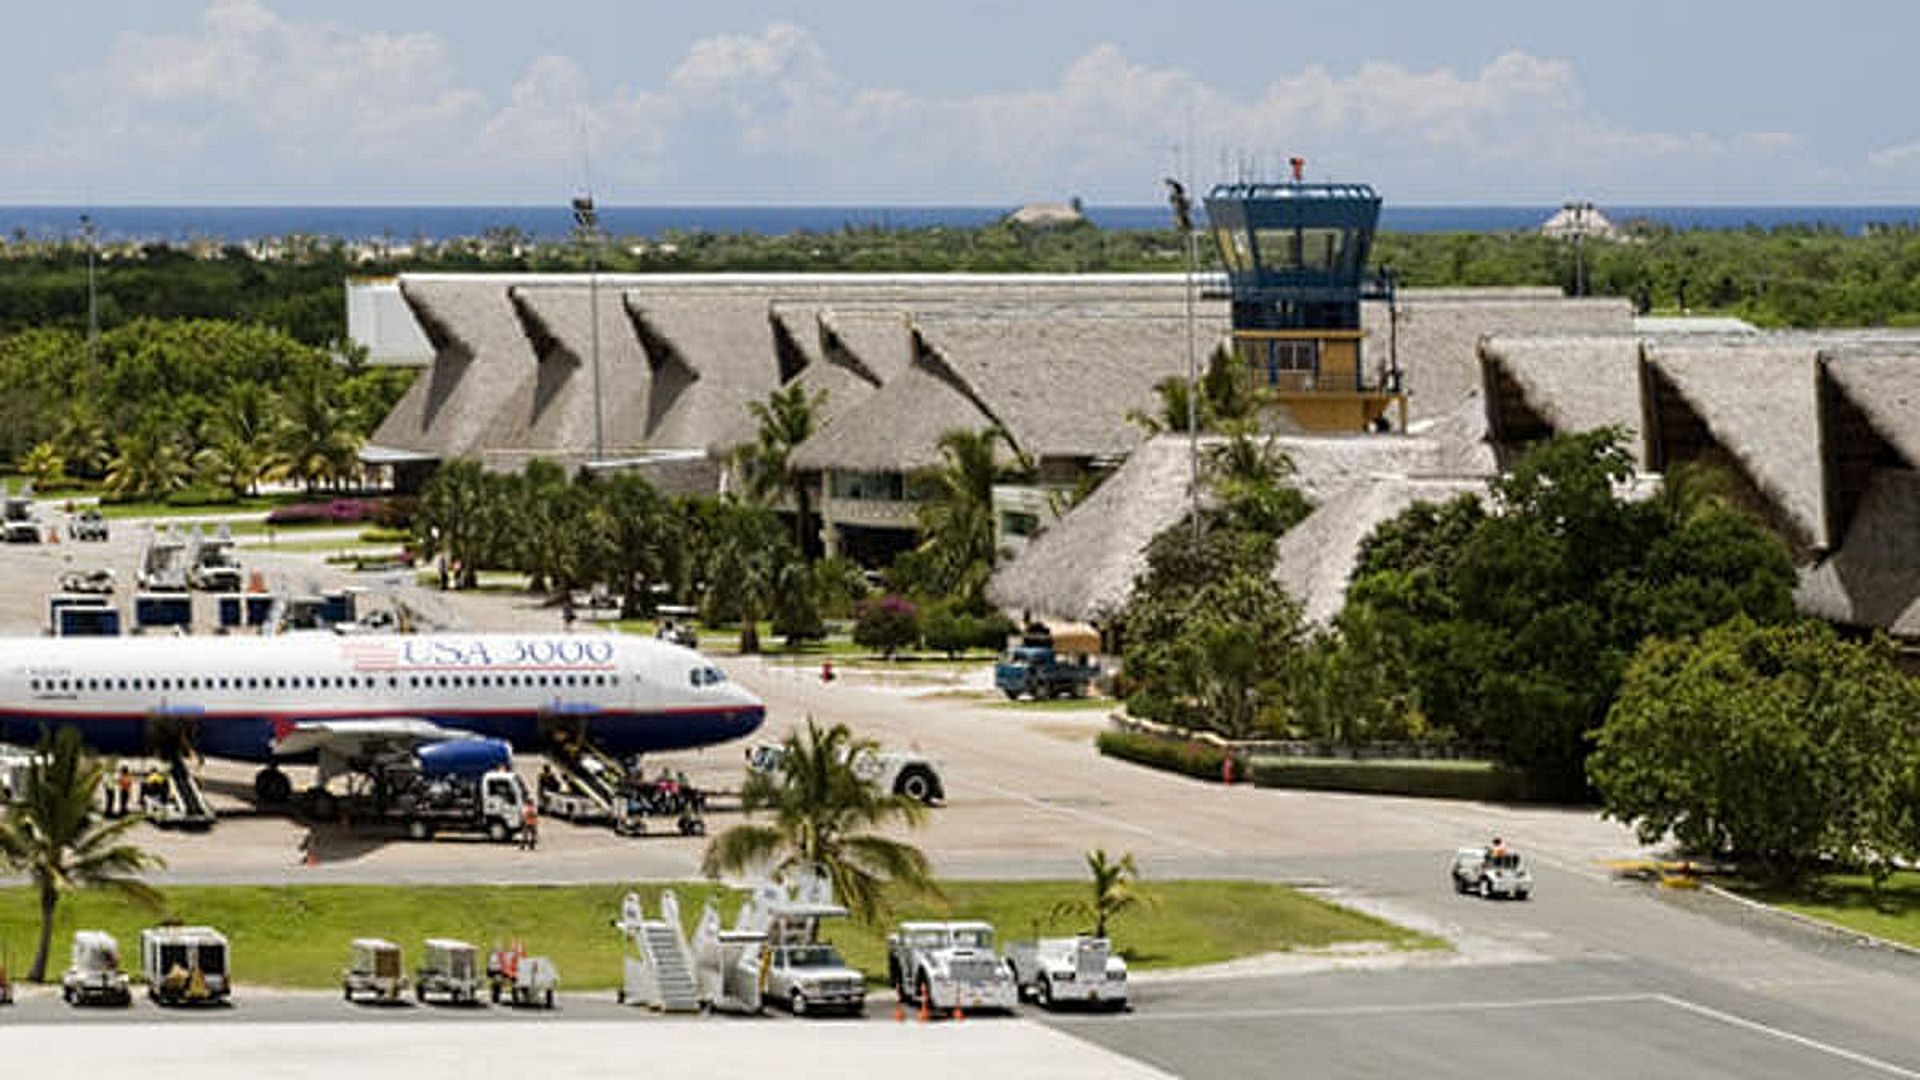 Punta Cana Airport projects 11 million passengers by 2025